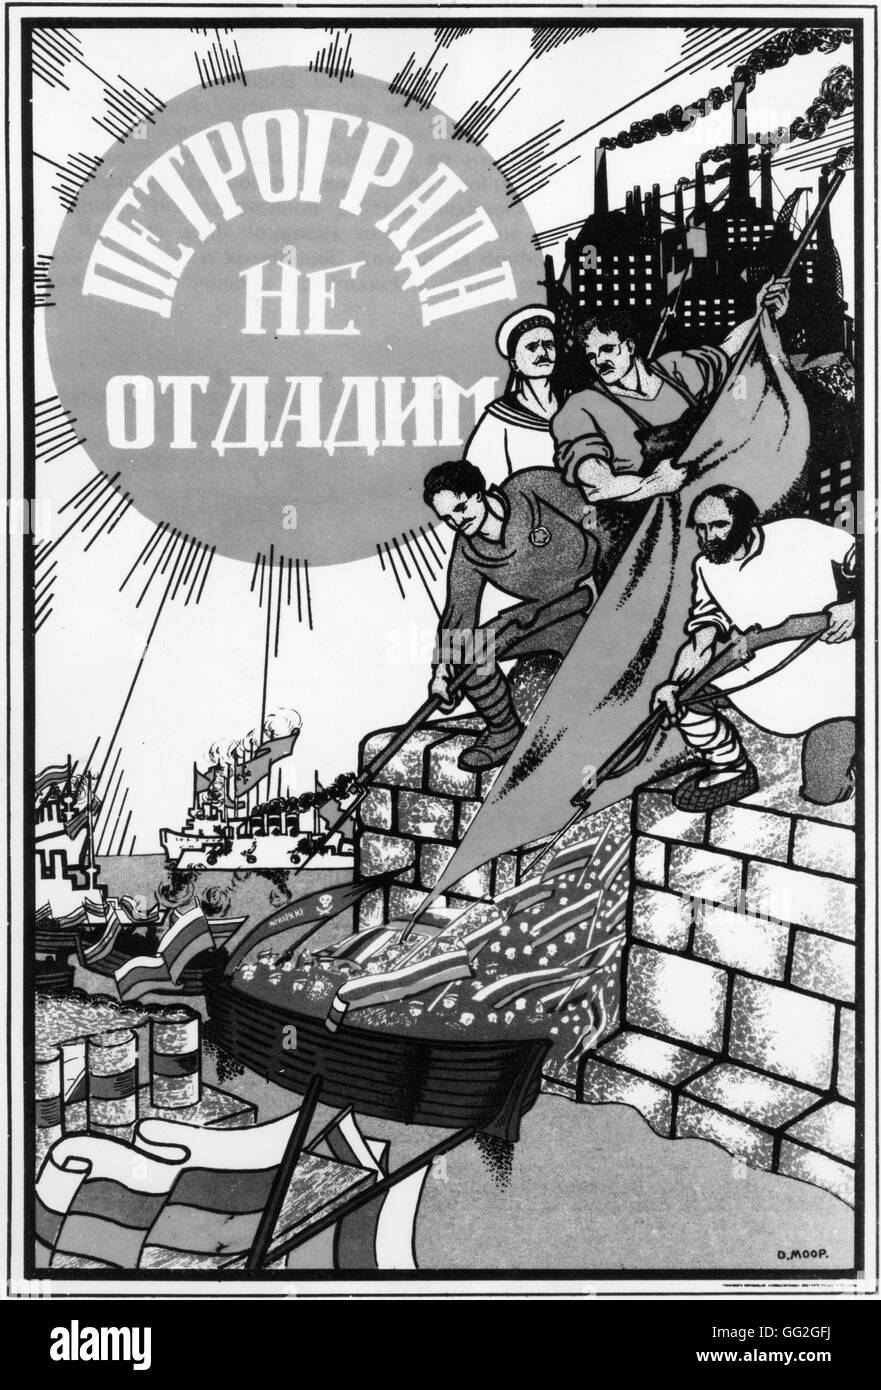 Dimitri Moor Russian school Poster exhorting men to defend Petrograd (St. Petersburg), probably during WWI. 20th century Moscow, Central Revolutionary Museum Stock Photo